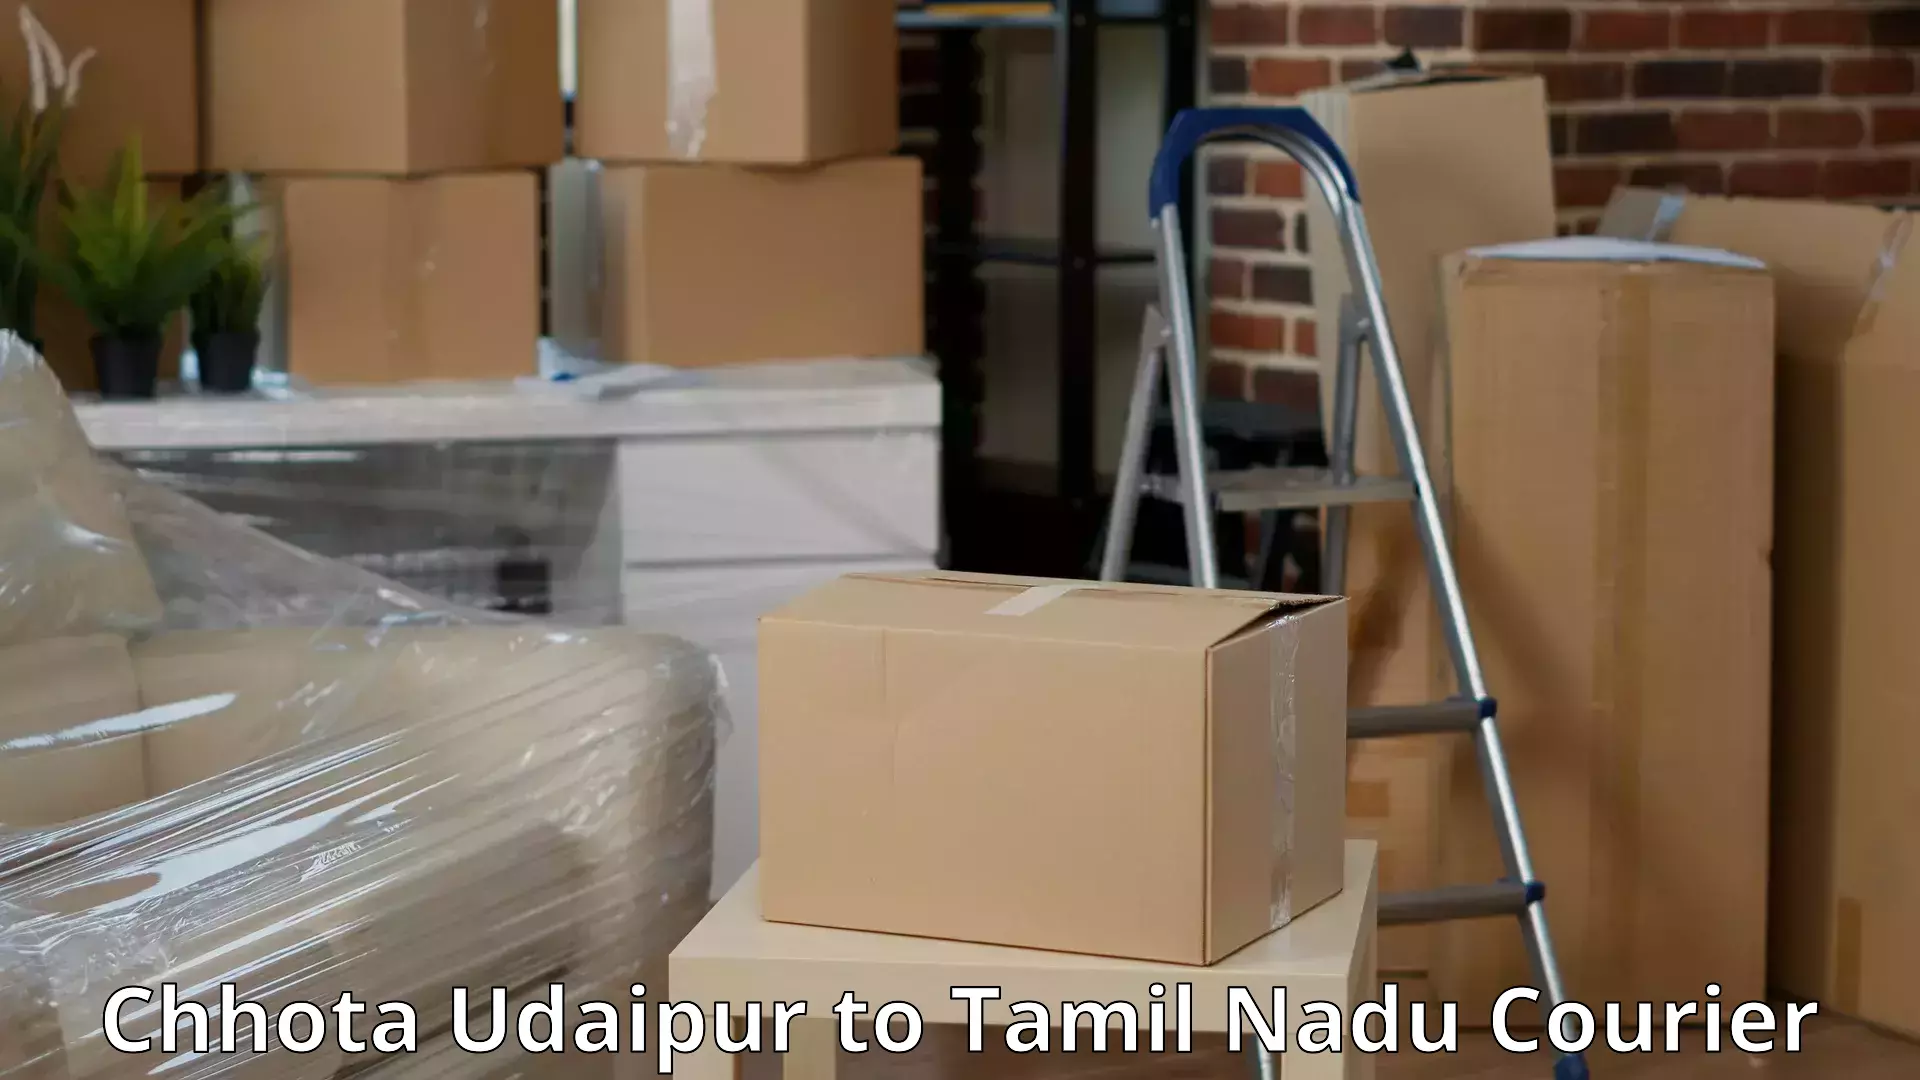 Furniture delivery service in Chhota Udaipur to Vriddhachalam